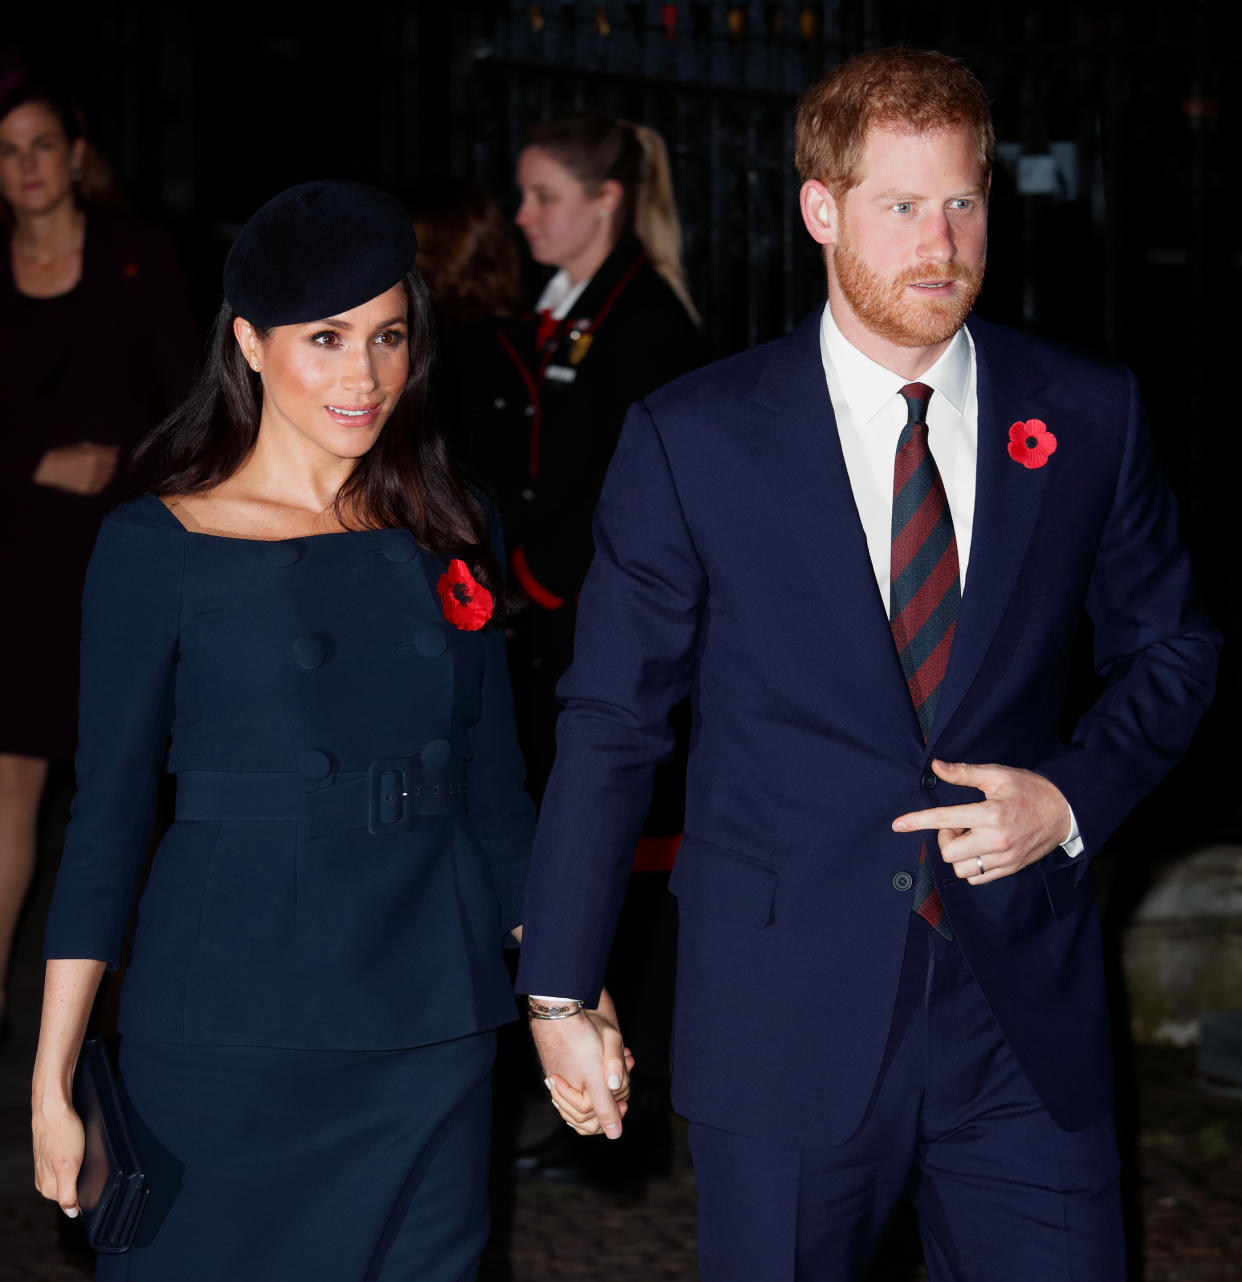 The Duke and Duchess of Sussex. [Photo: Getty].